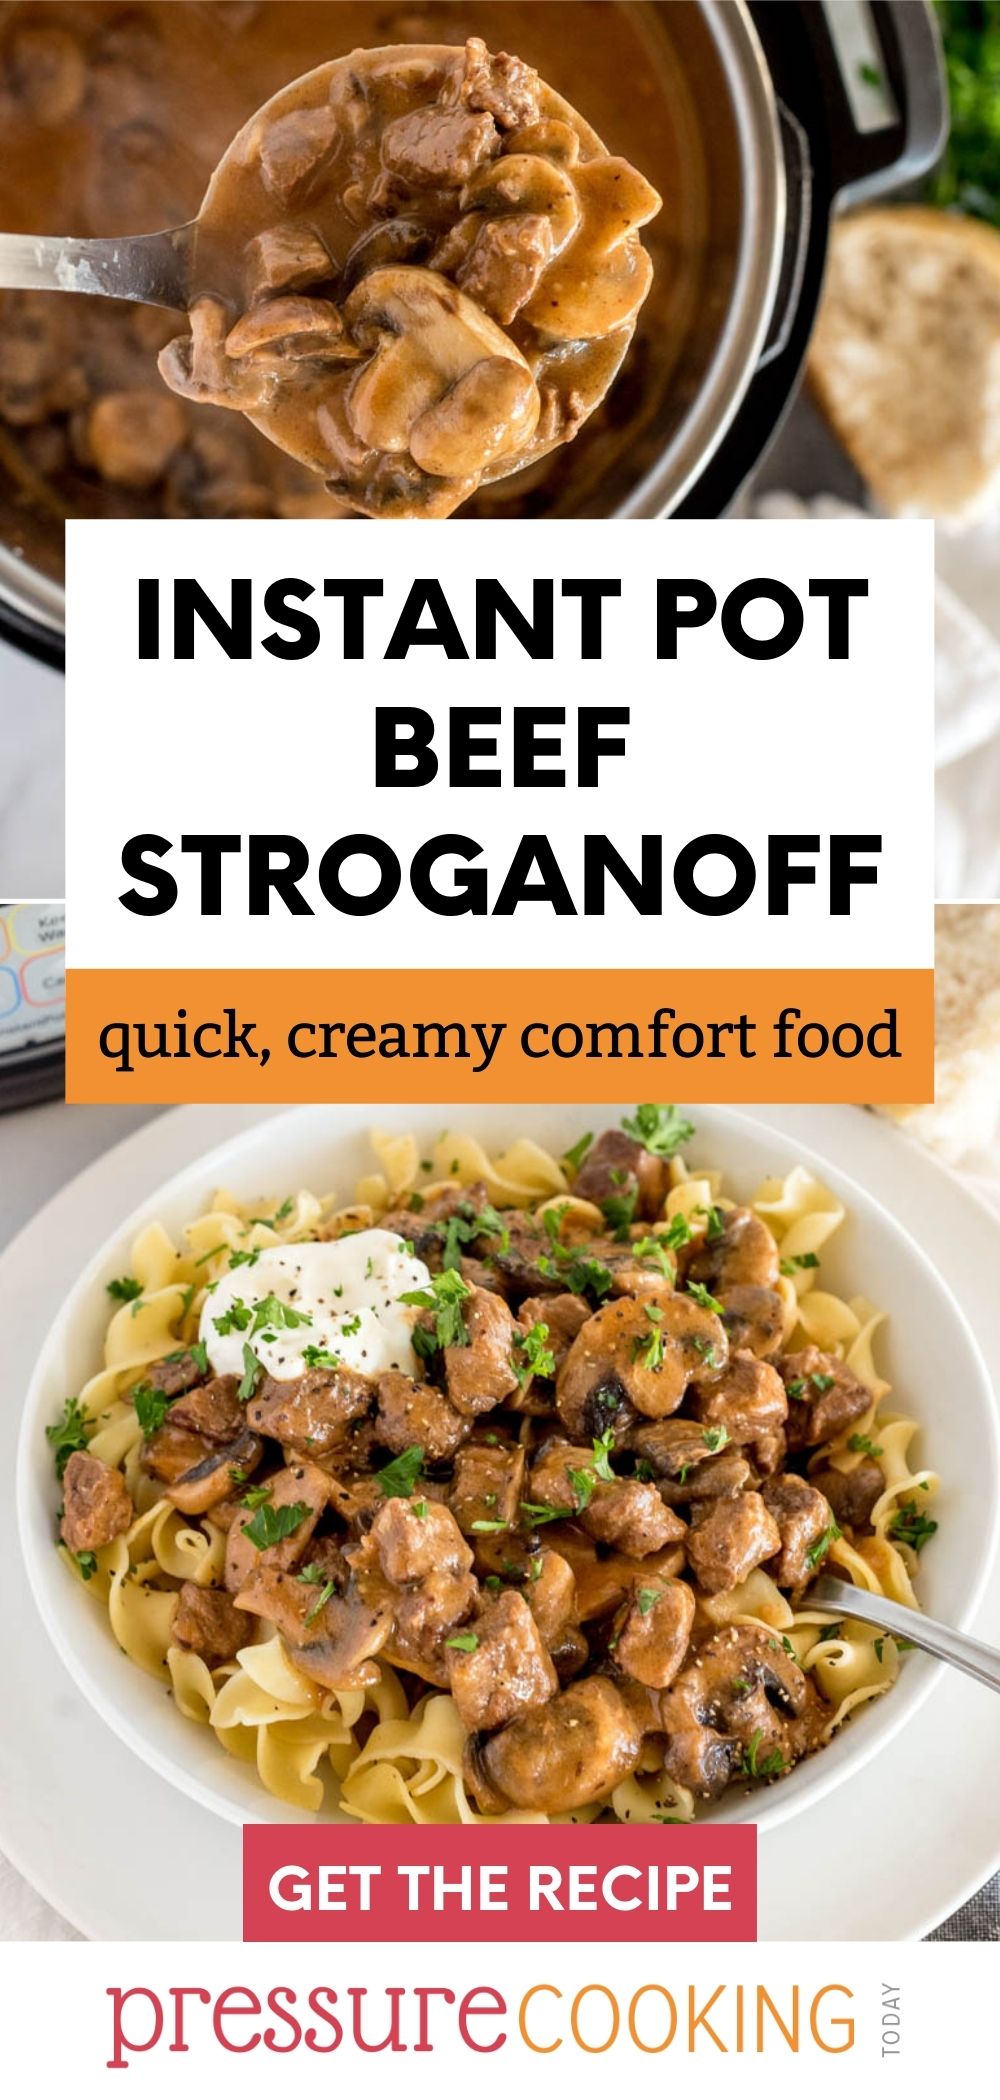 This Instant Pot beef stroganoff recipe is a simple and delicious pressure cooker meal made from beef, mushrooms, and gravy for an easy weeknight dinner! Recipe works in the Ninja Foodi, Instant Pot, Power Pressure Cooker, and any other brand of electric pressure cooker. via @PressureCook2da